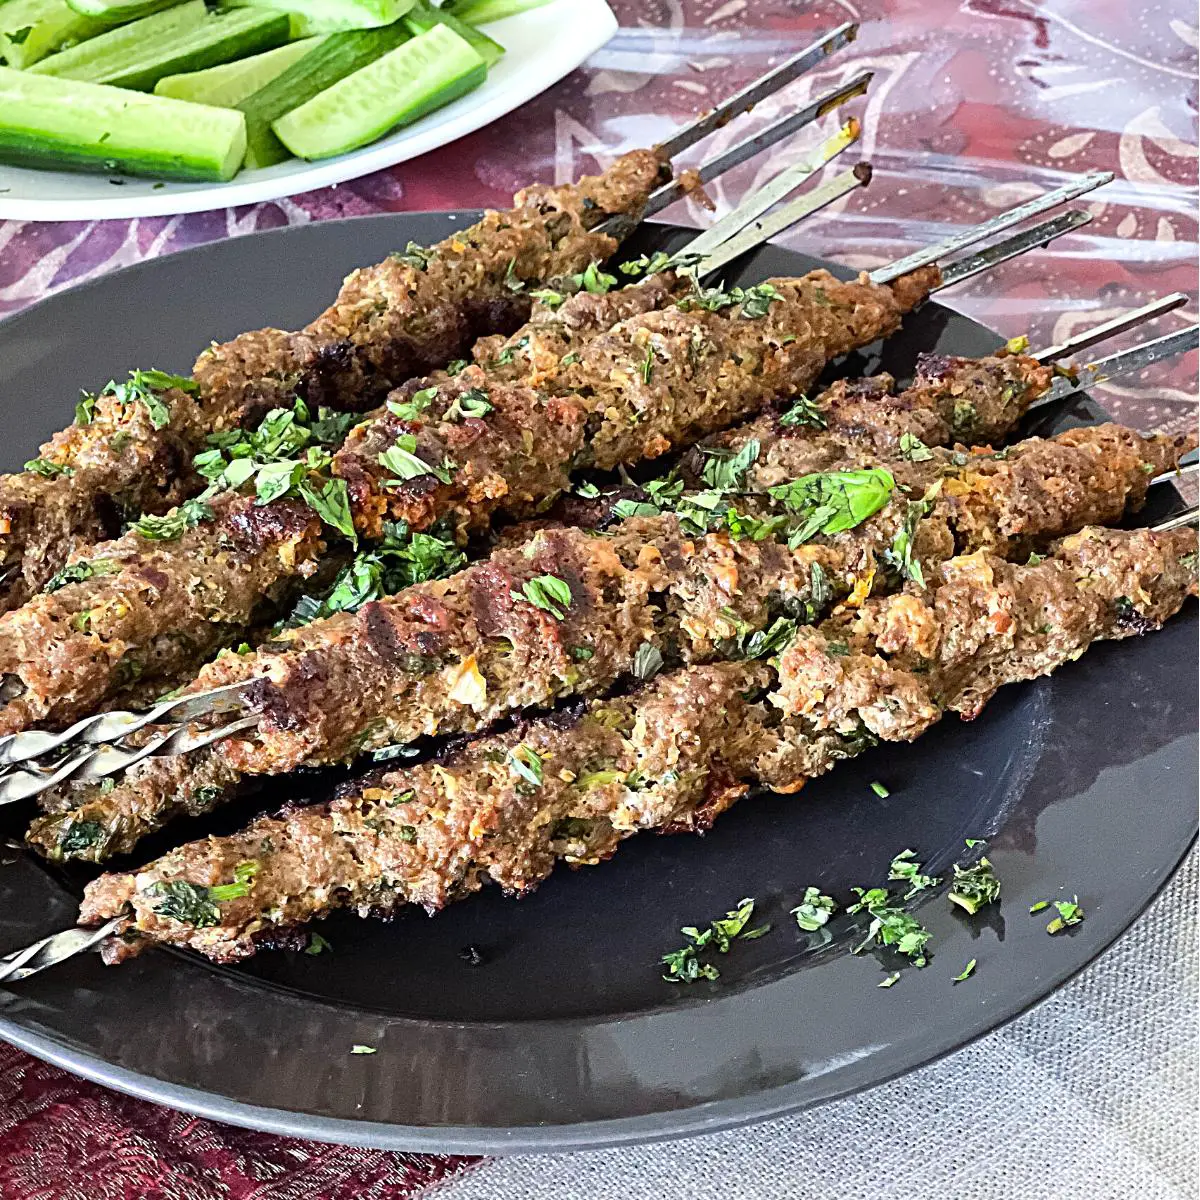 A plate with ground beef kebabs.